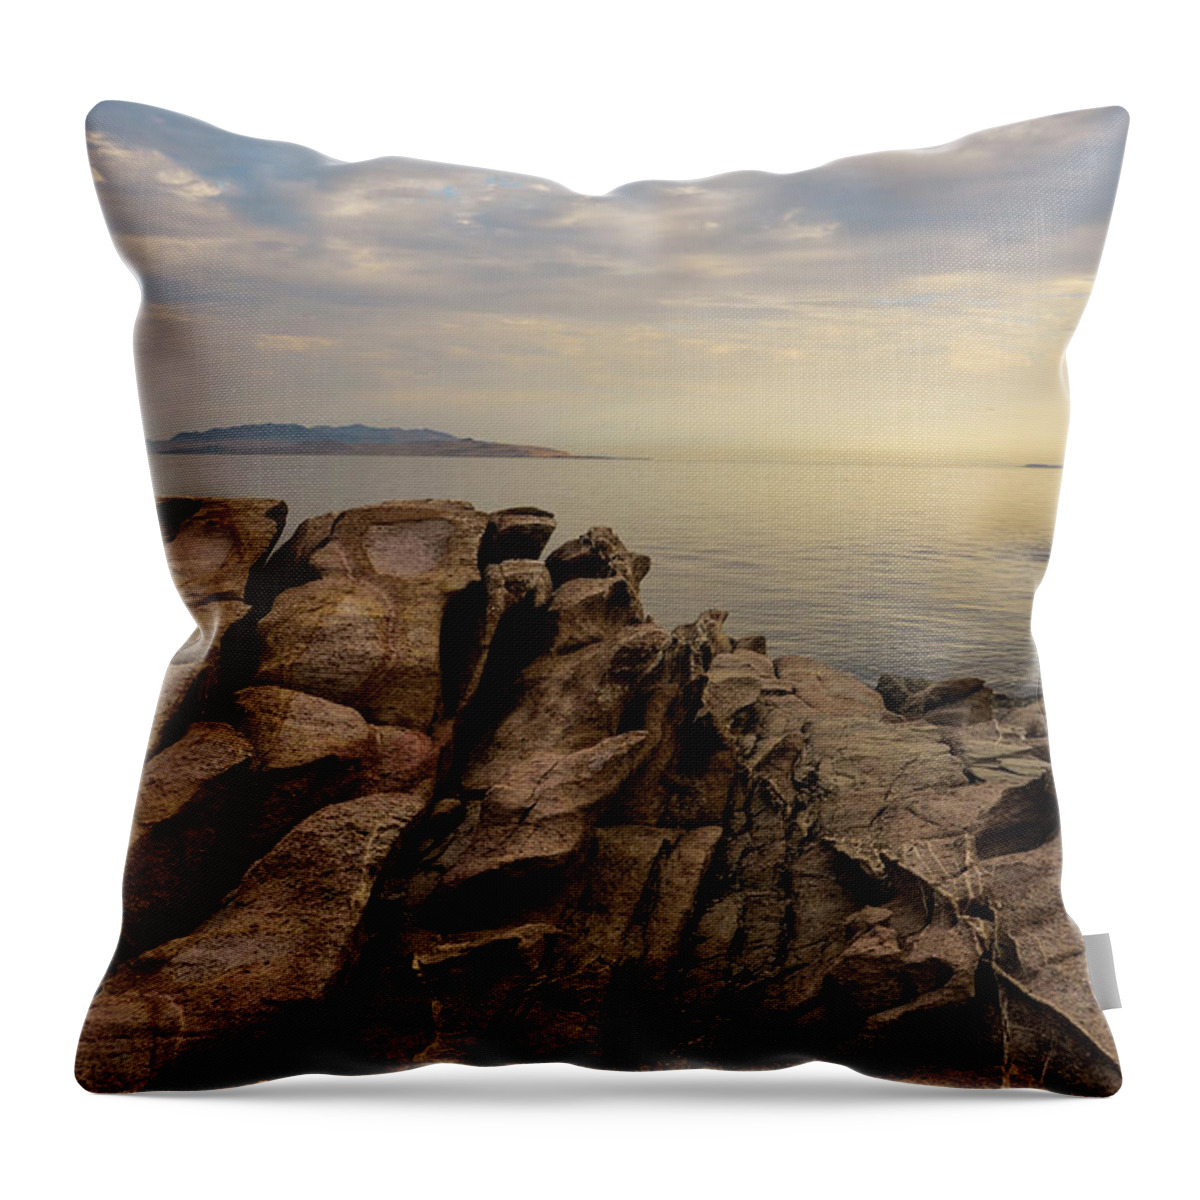 Tranquility Throw Pillow featuring the photograph Great Salt Lake by R.nial.bradshaw